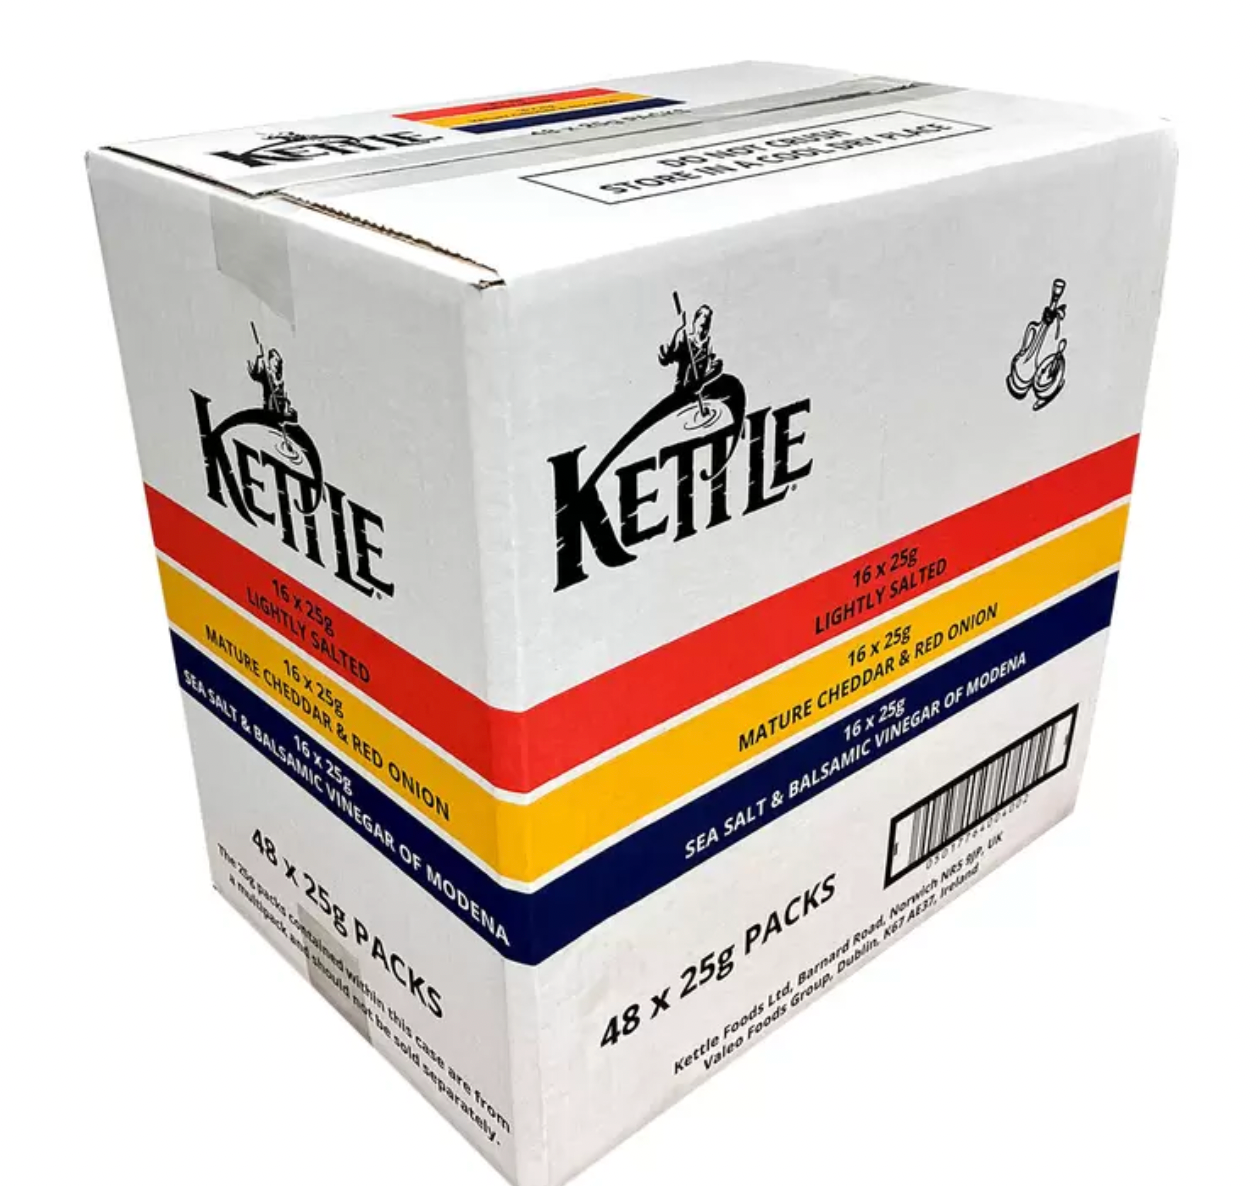 Kettle Hand Cooked Potato Chips Take Home Variety Box 48x25g - A Flavourful Adventure in Every Bite